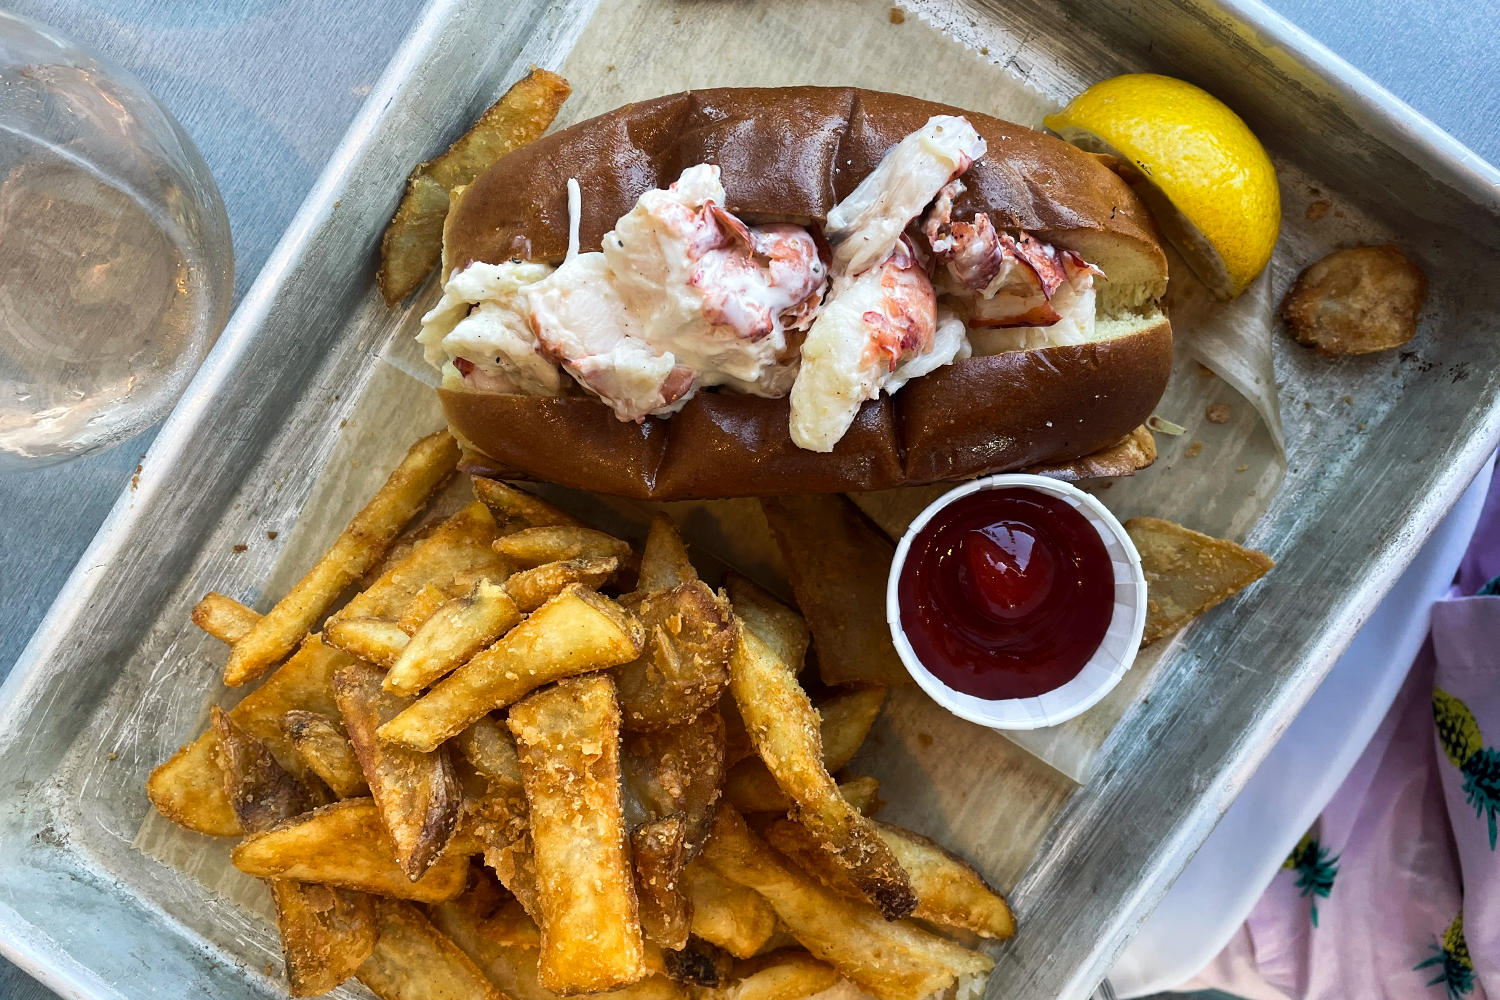 A Stone's Throw lobster roll